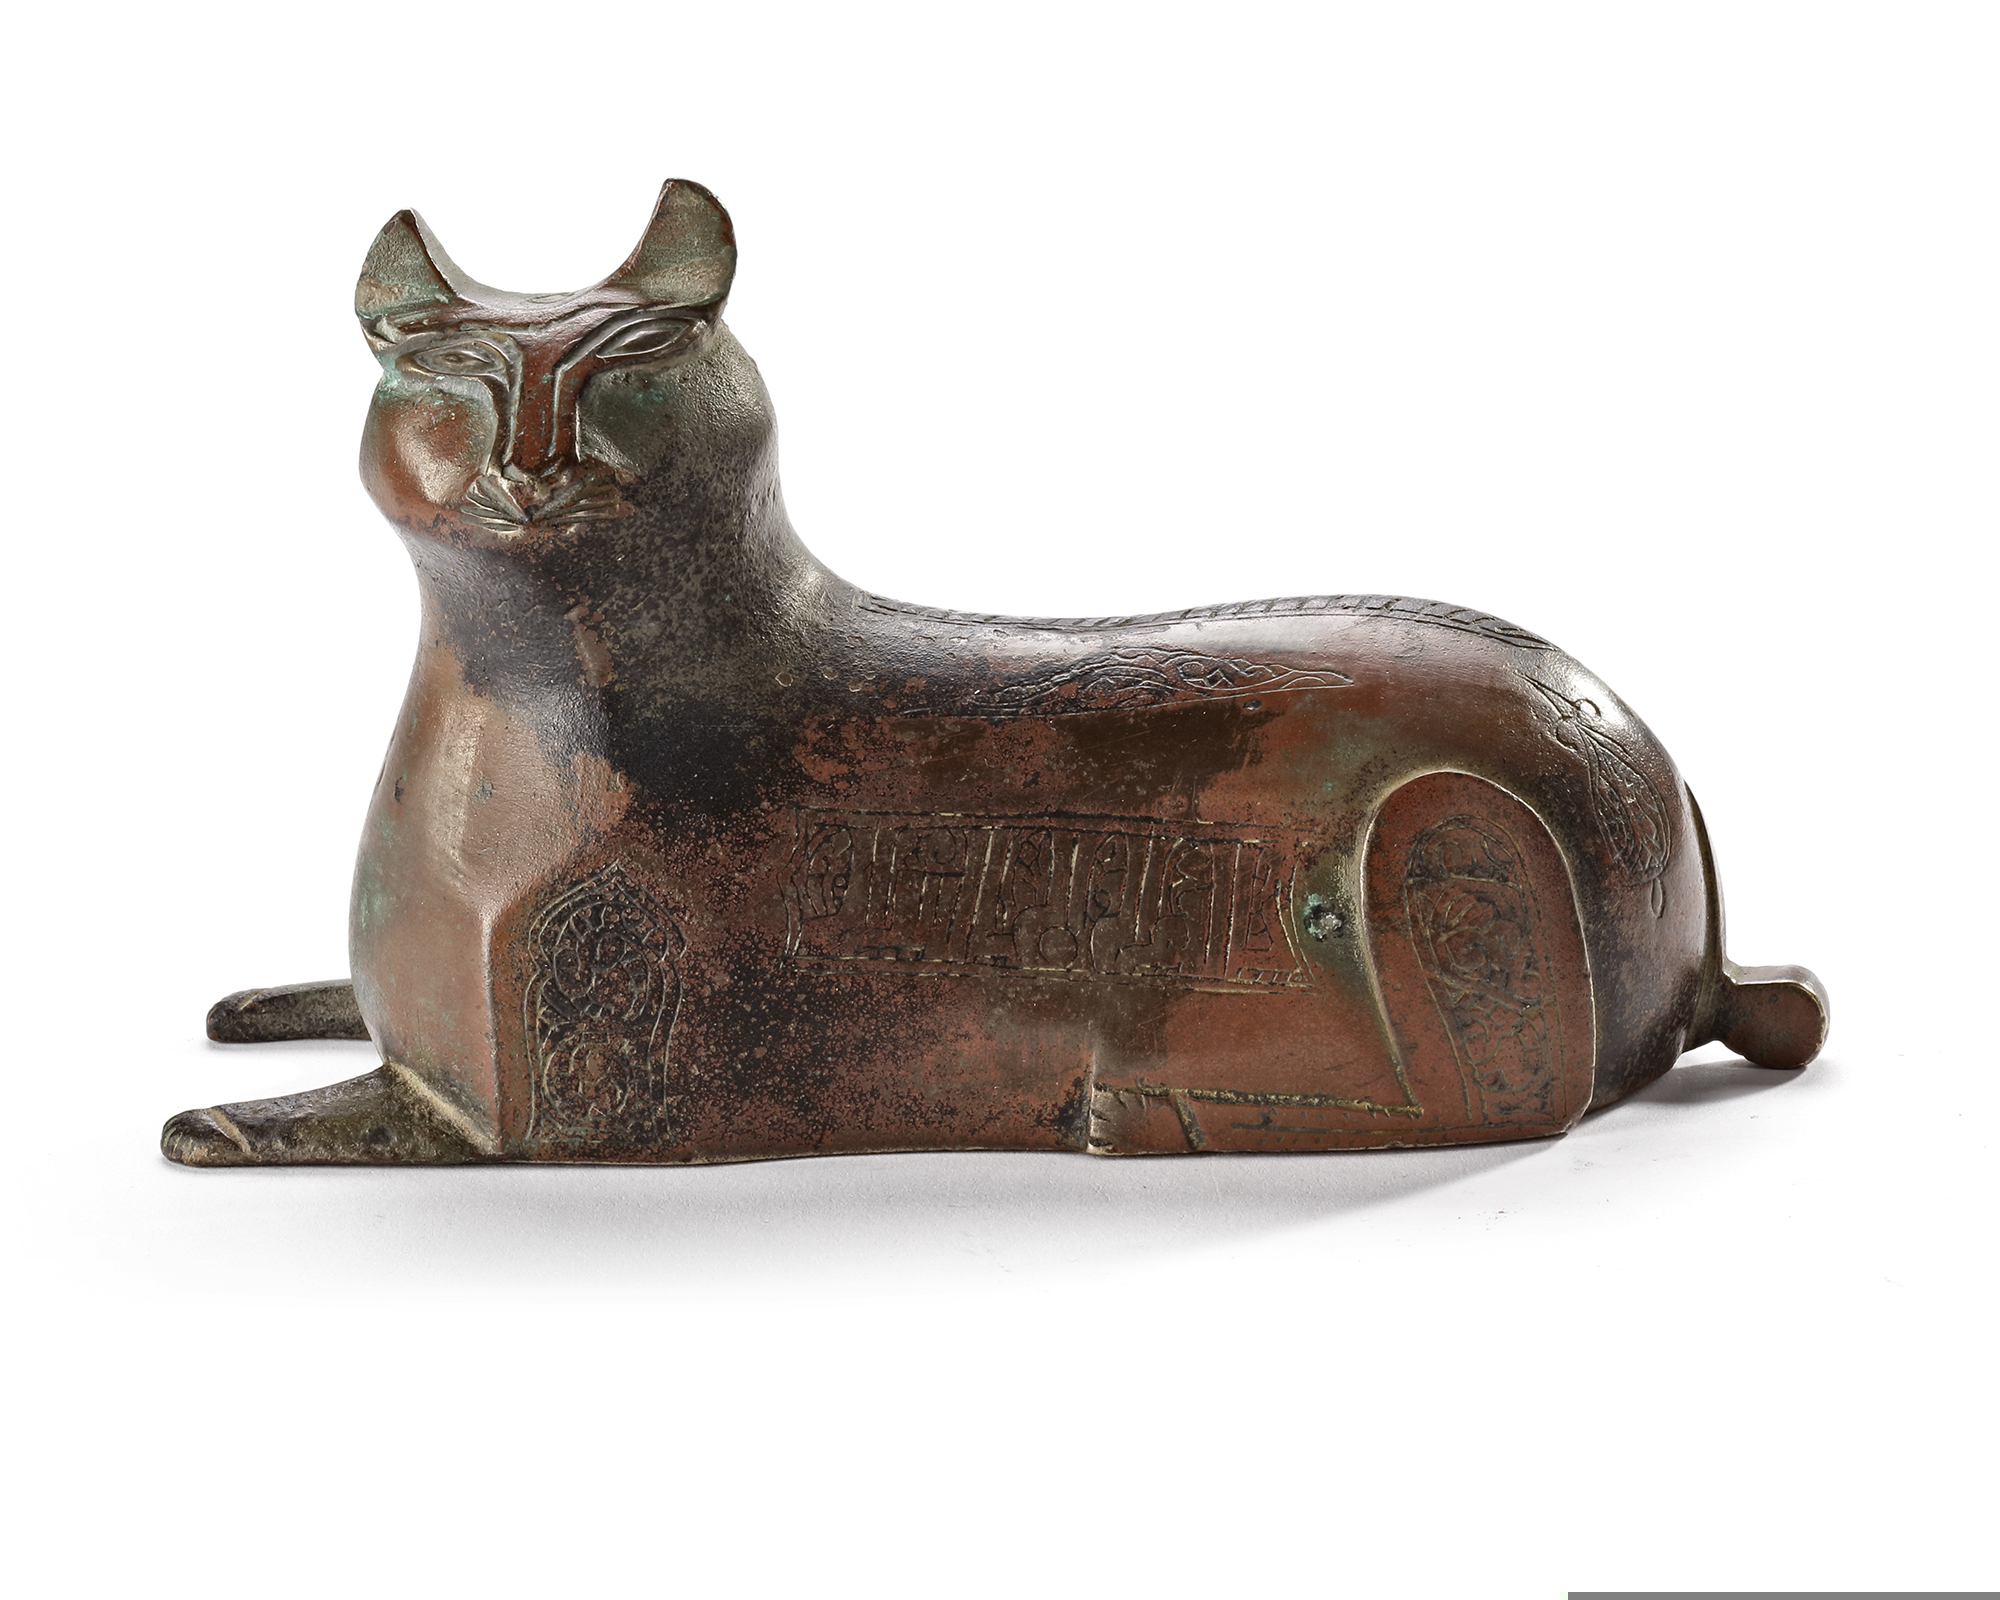 A KHORASAN BRONZE WEIGHT FIGURINE IN THE FORM OF A LION, PERSIA, 12TH CENTURY - Image 2 of 8